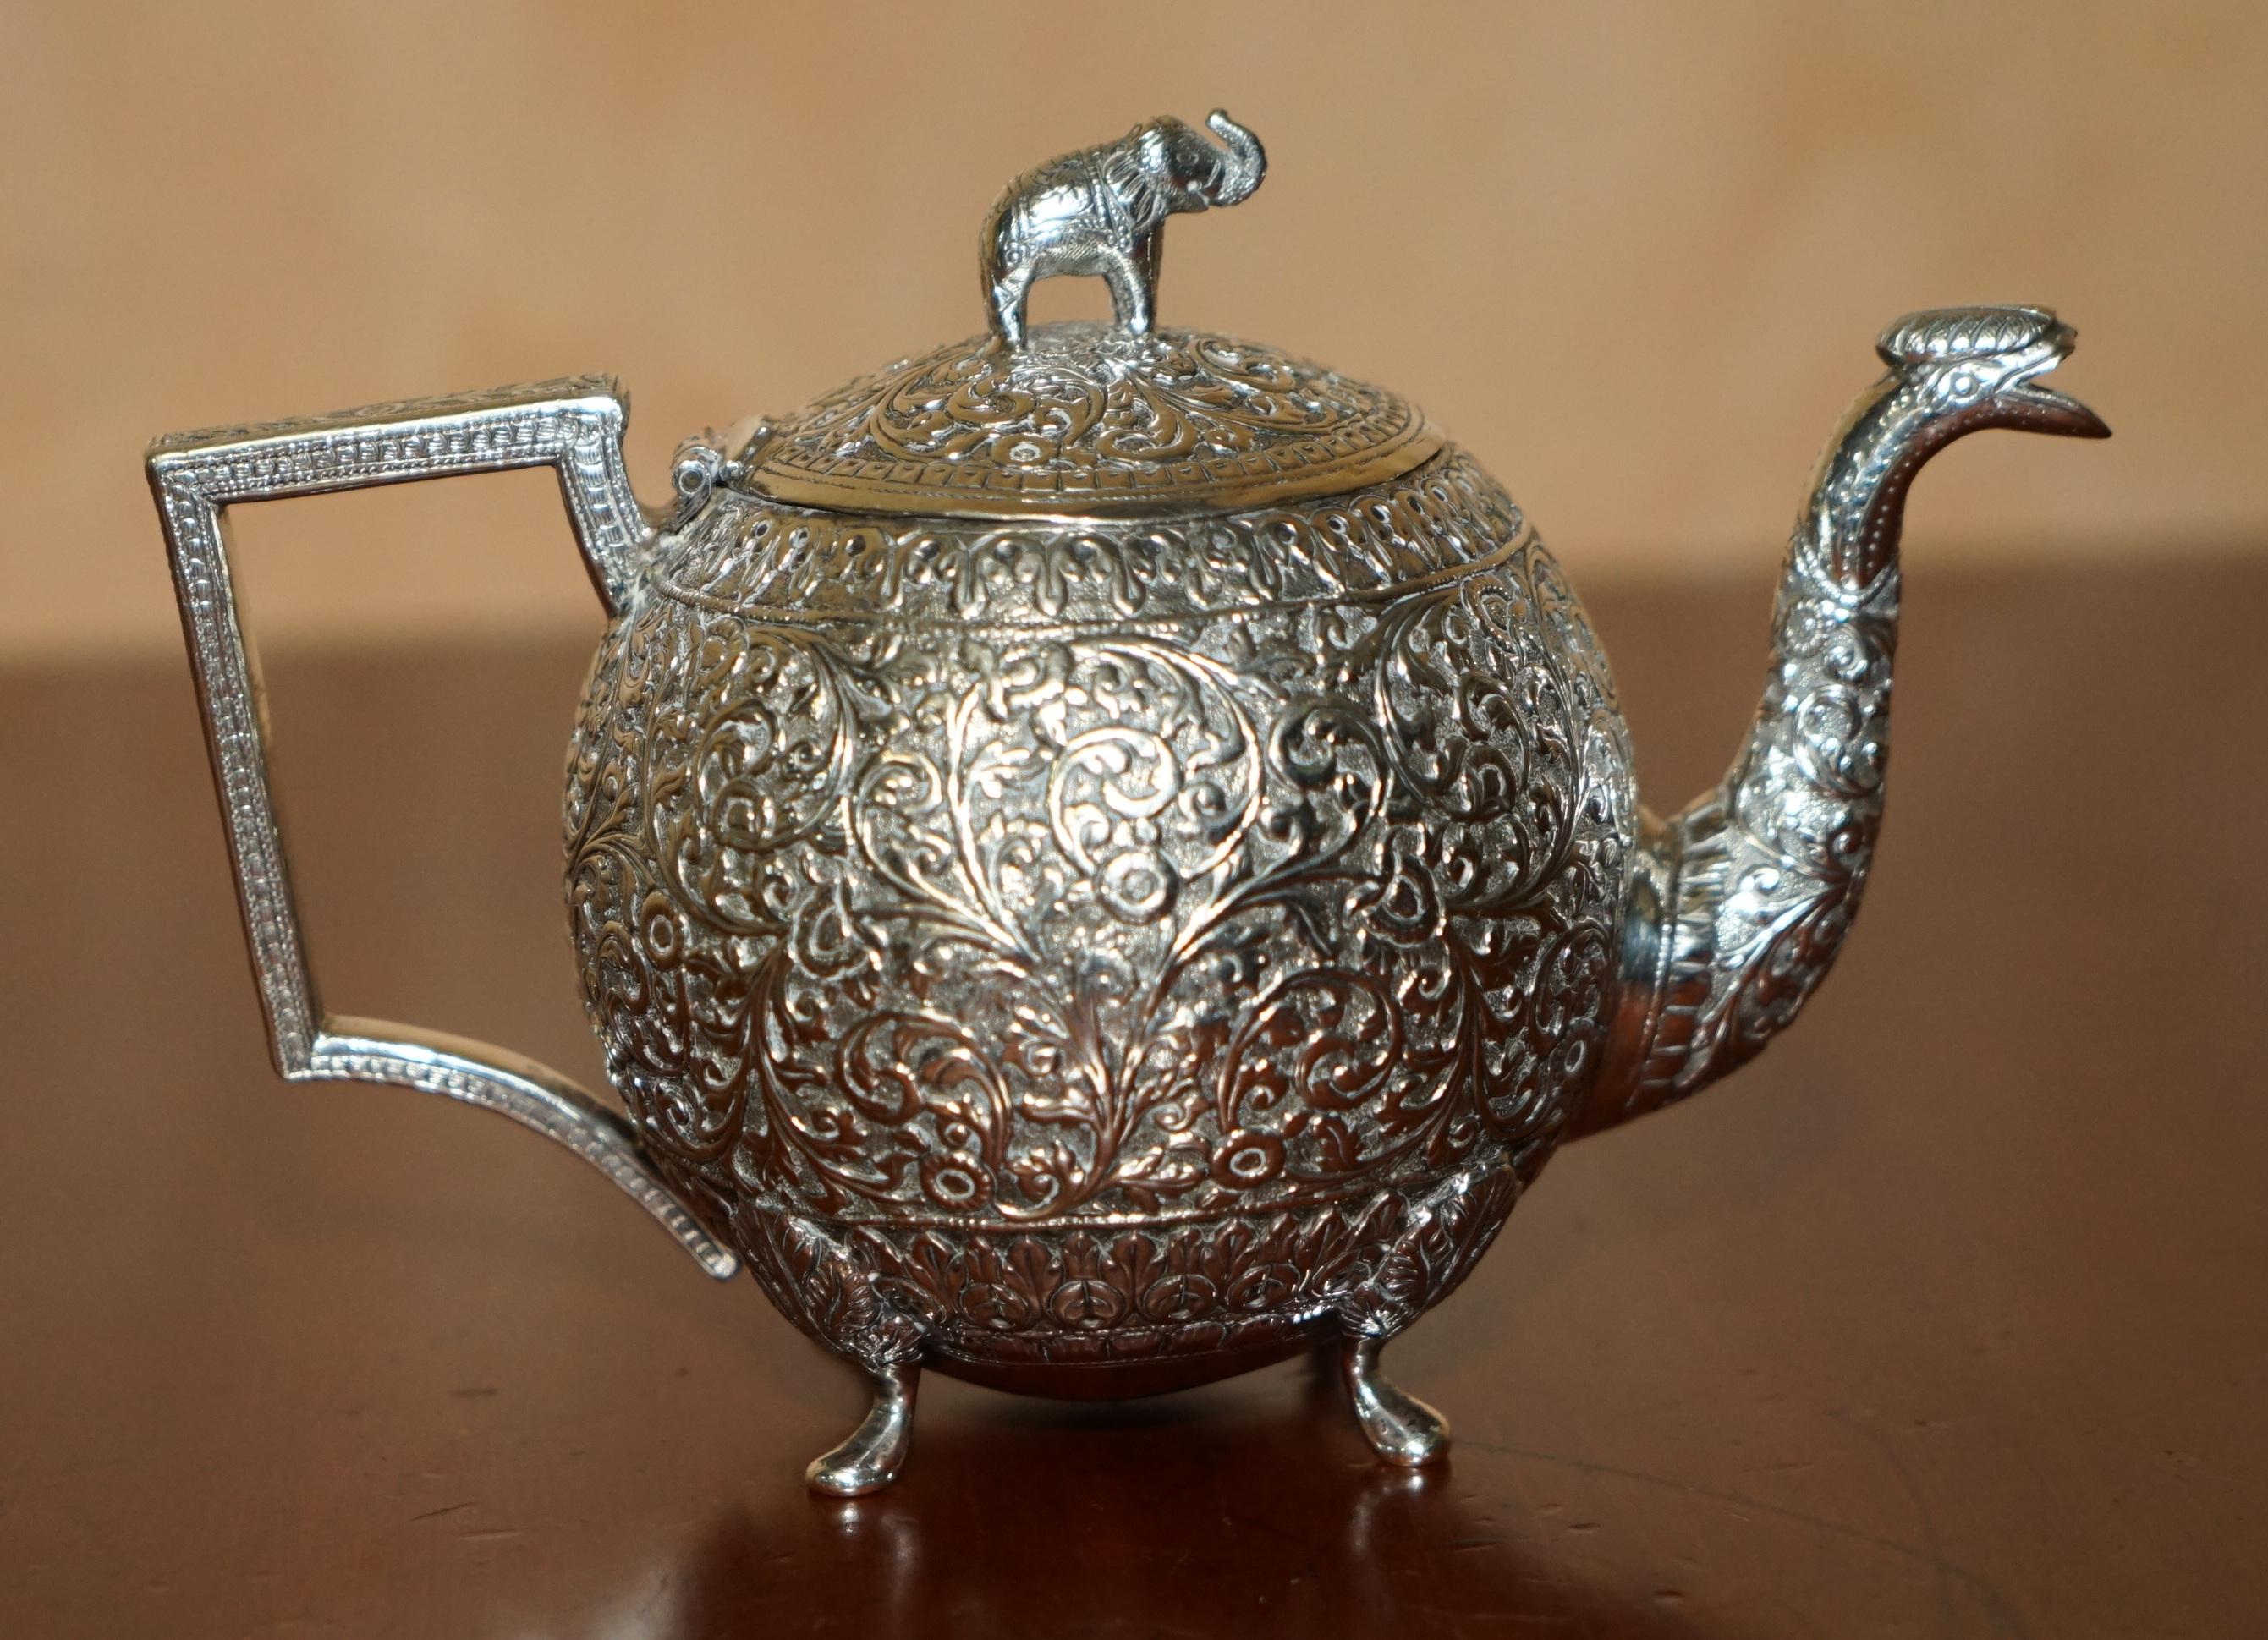 ANTIQUE INDIAN ELEPHANT COLONIAL SOLiD SILBER TEA SERVICE OOMERSI MAWJI & SONS im Angebot 2